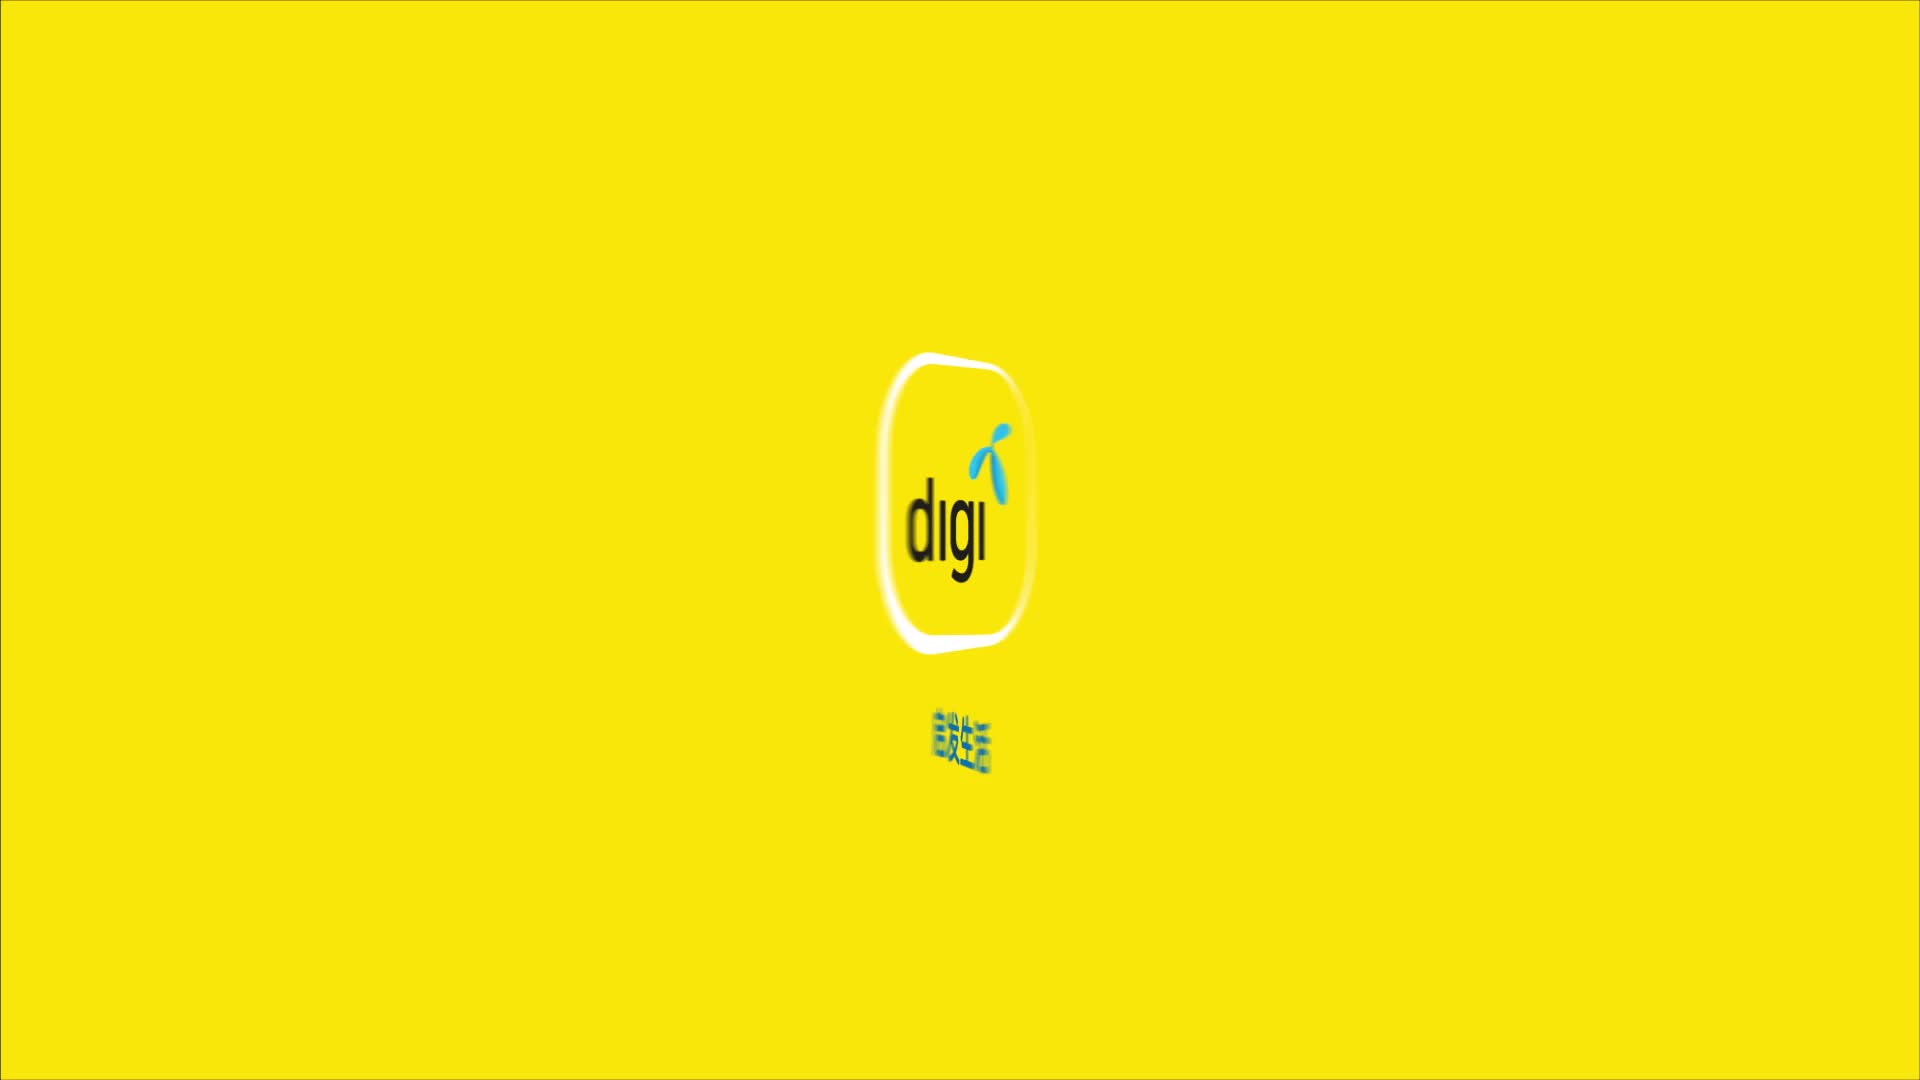 MyDigi - Get only the gifts you love - Jimmy Wong